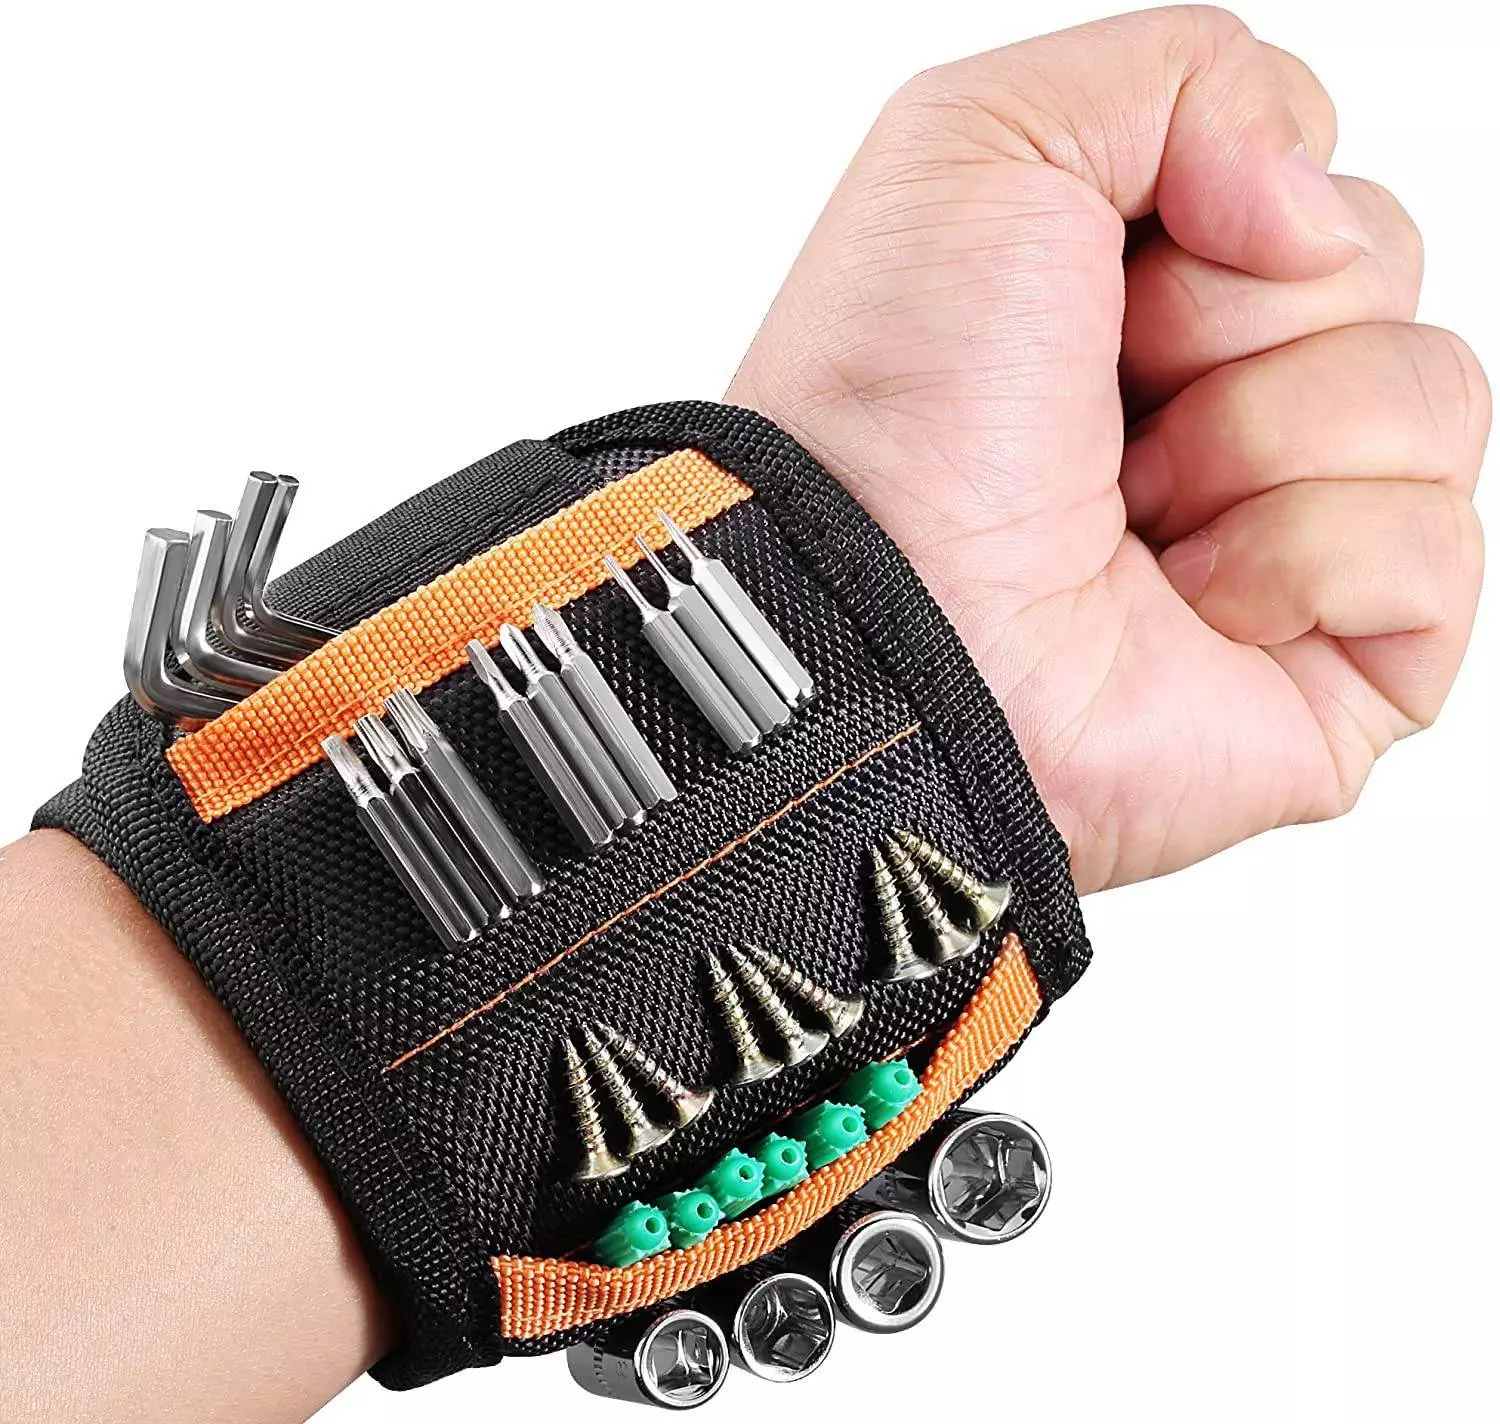 Magnetic Tools Wristband with 20 Strong Magnets - Purified NZ